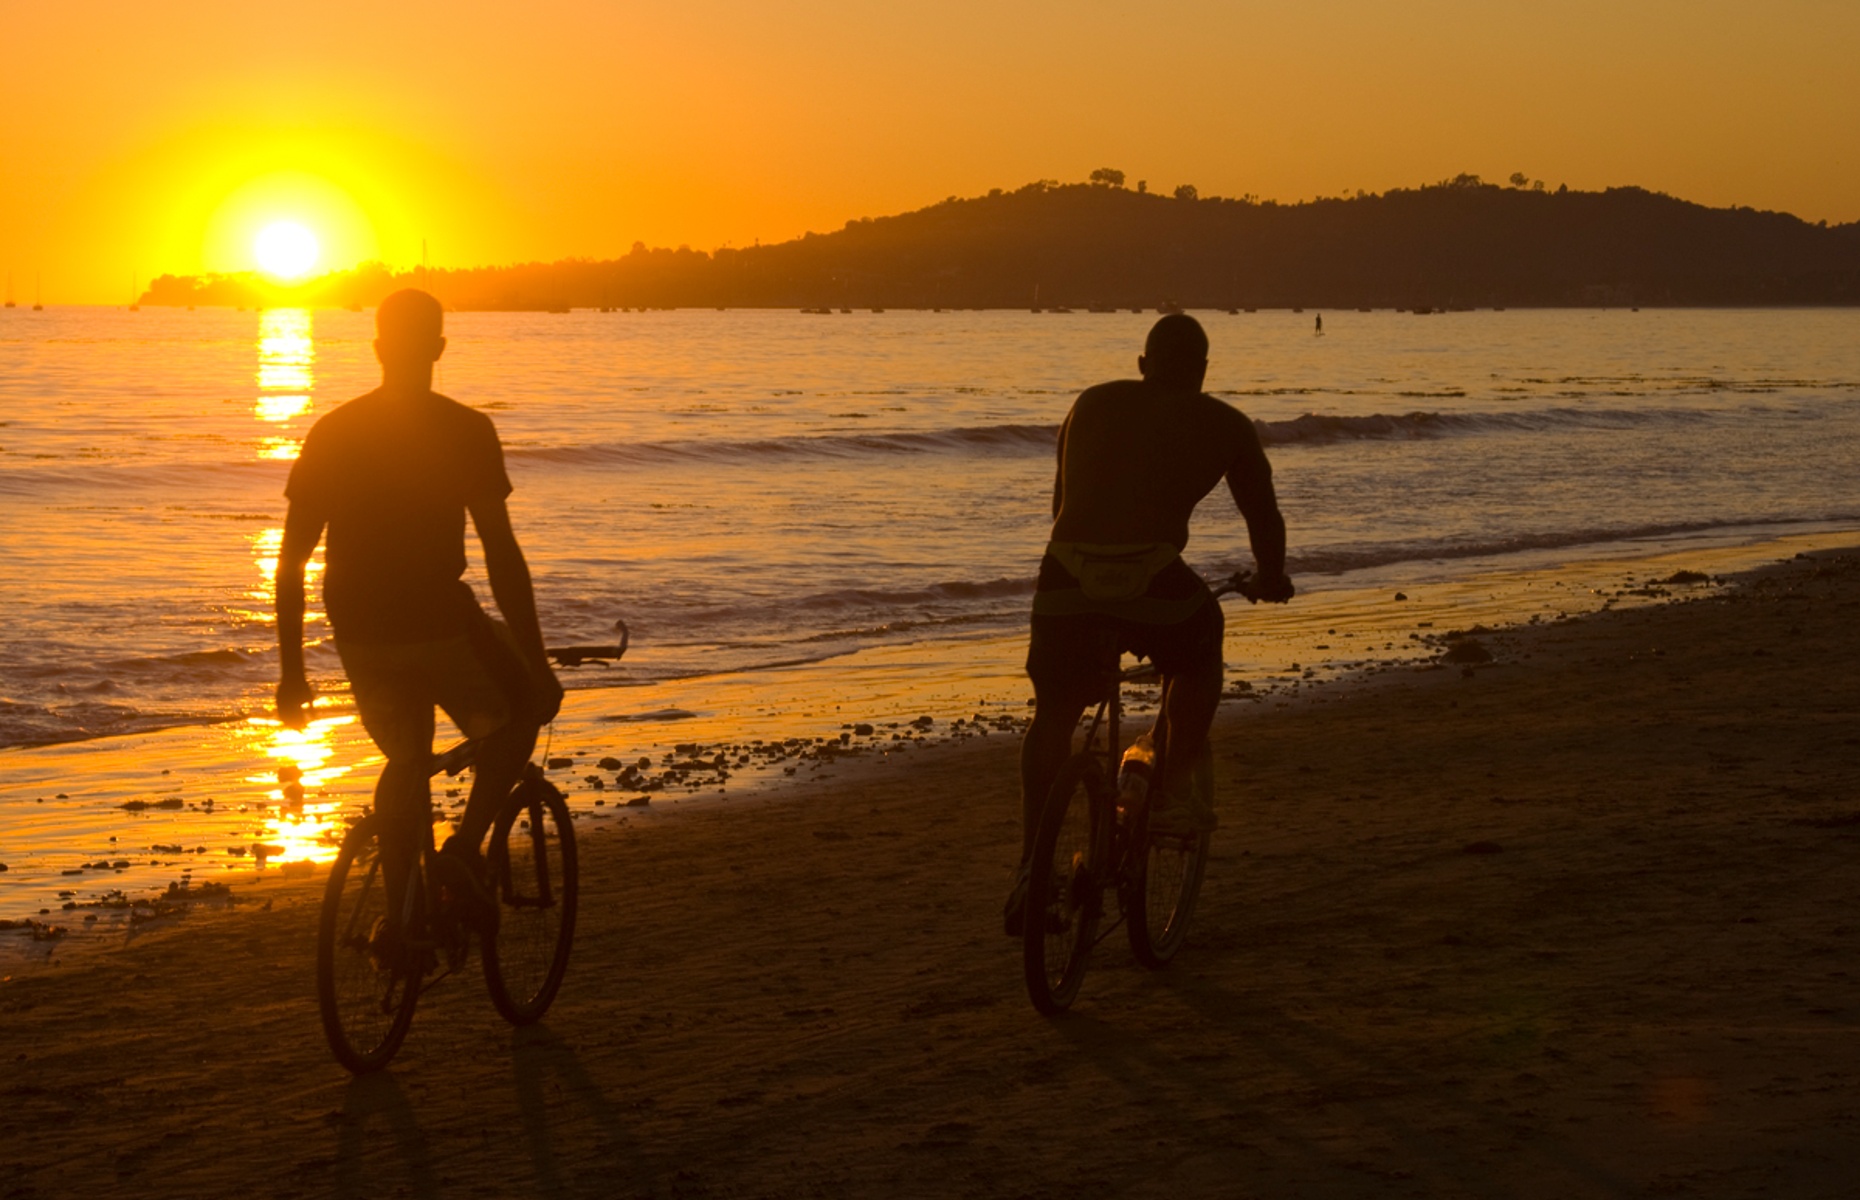 Butterfly Beach (Image: Damian Gadal/CC BY 2.0/Flickr)